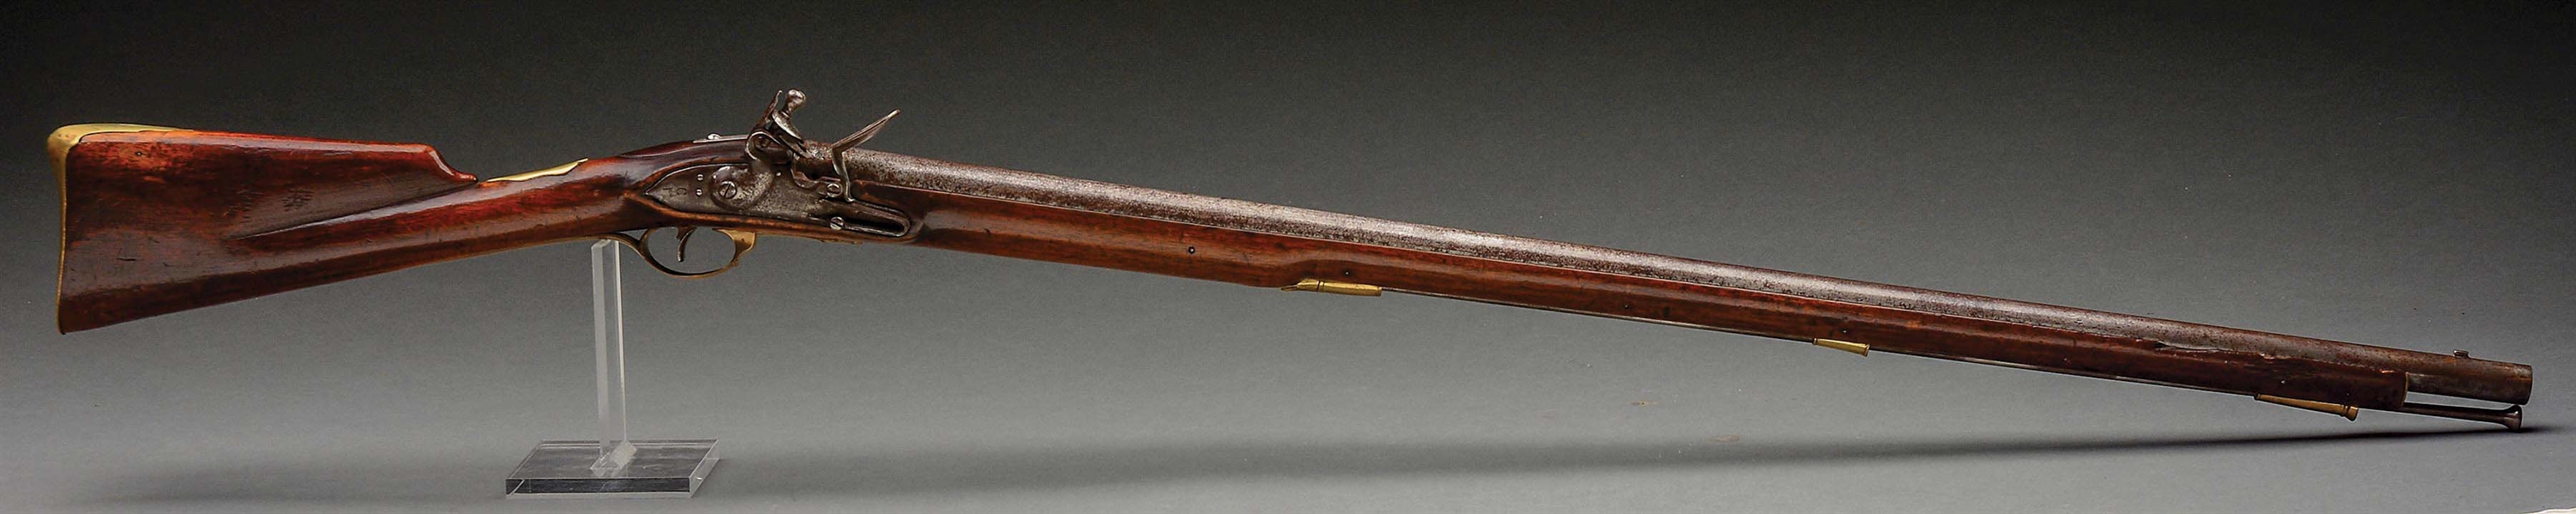 (A) AMERICAN FLINTLOCK MUSKET MARKED TO THE 1ST CONNECTICUT REGIMENT AND SIGNED "M. HILLS".